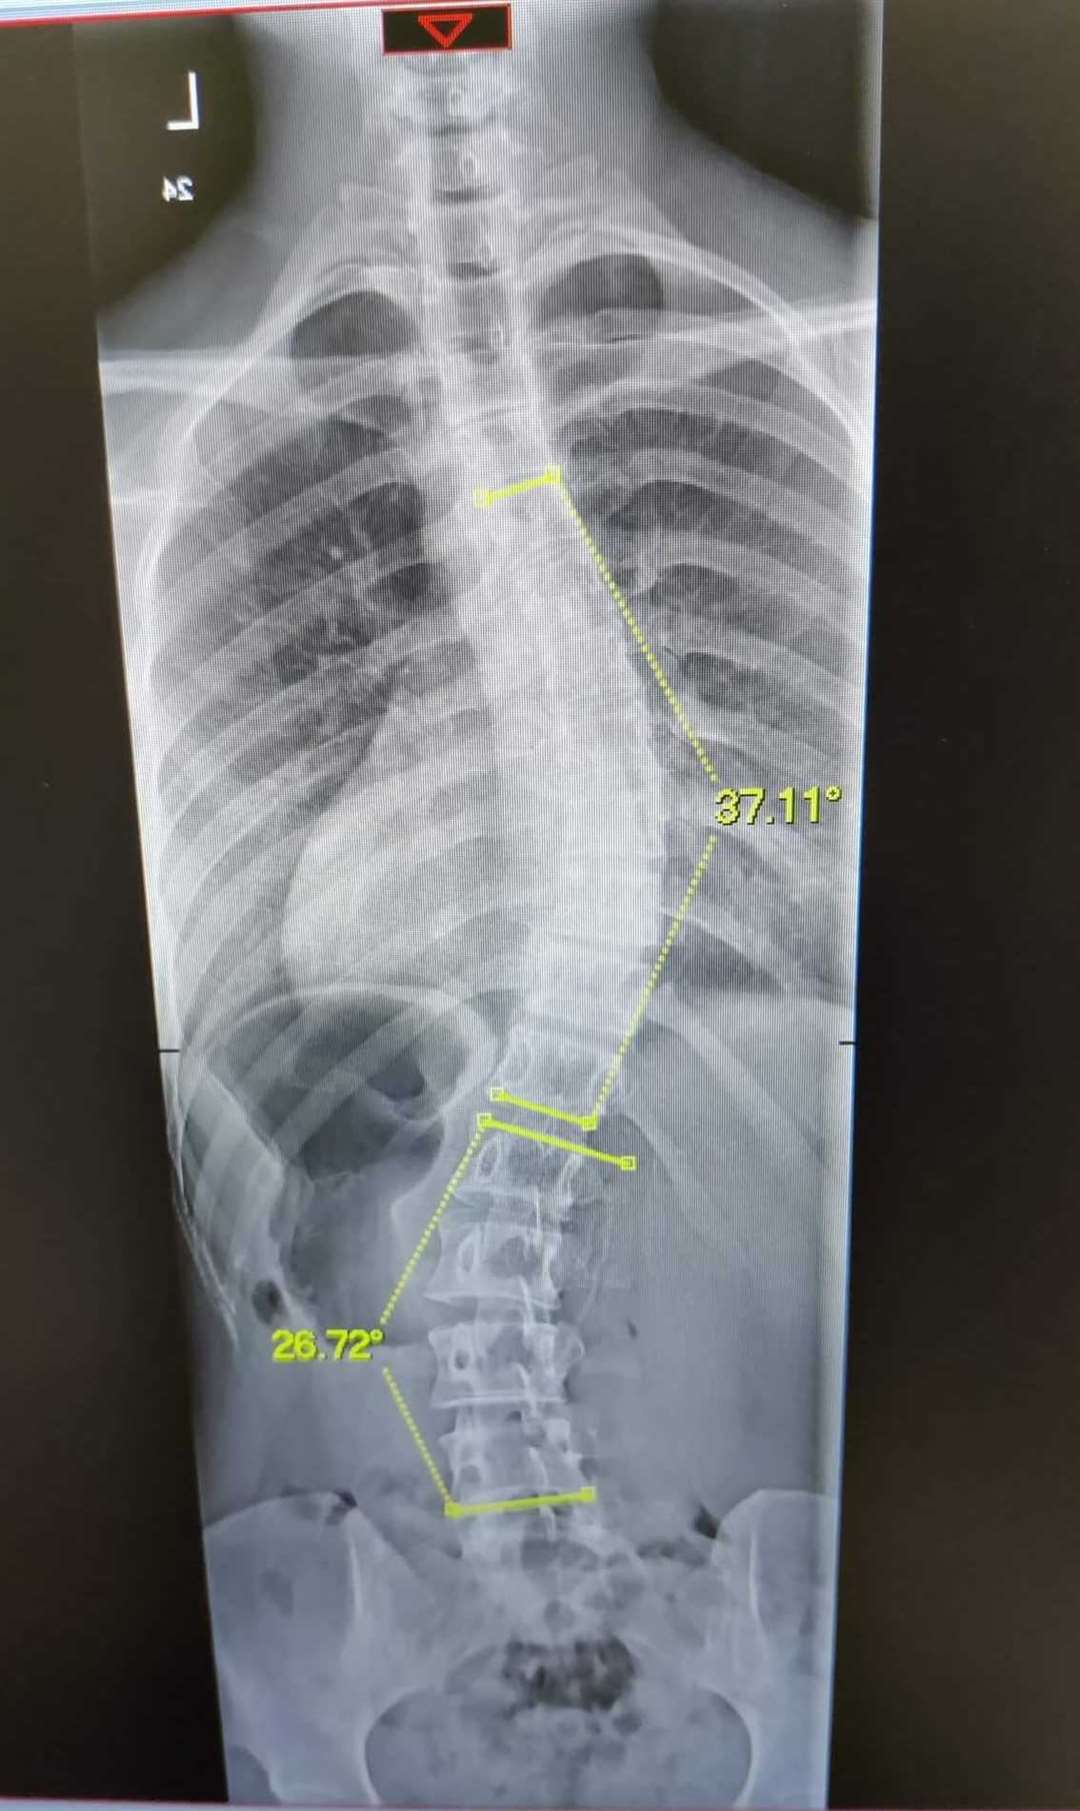 The x-ray of Jenna's spinal scoliosis.